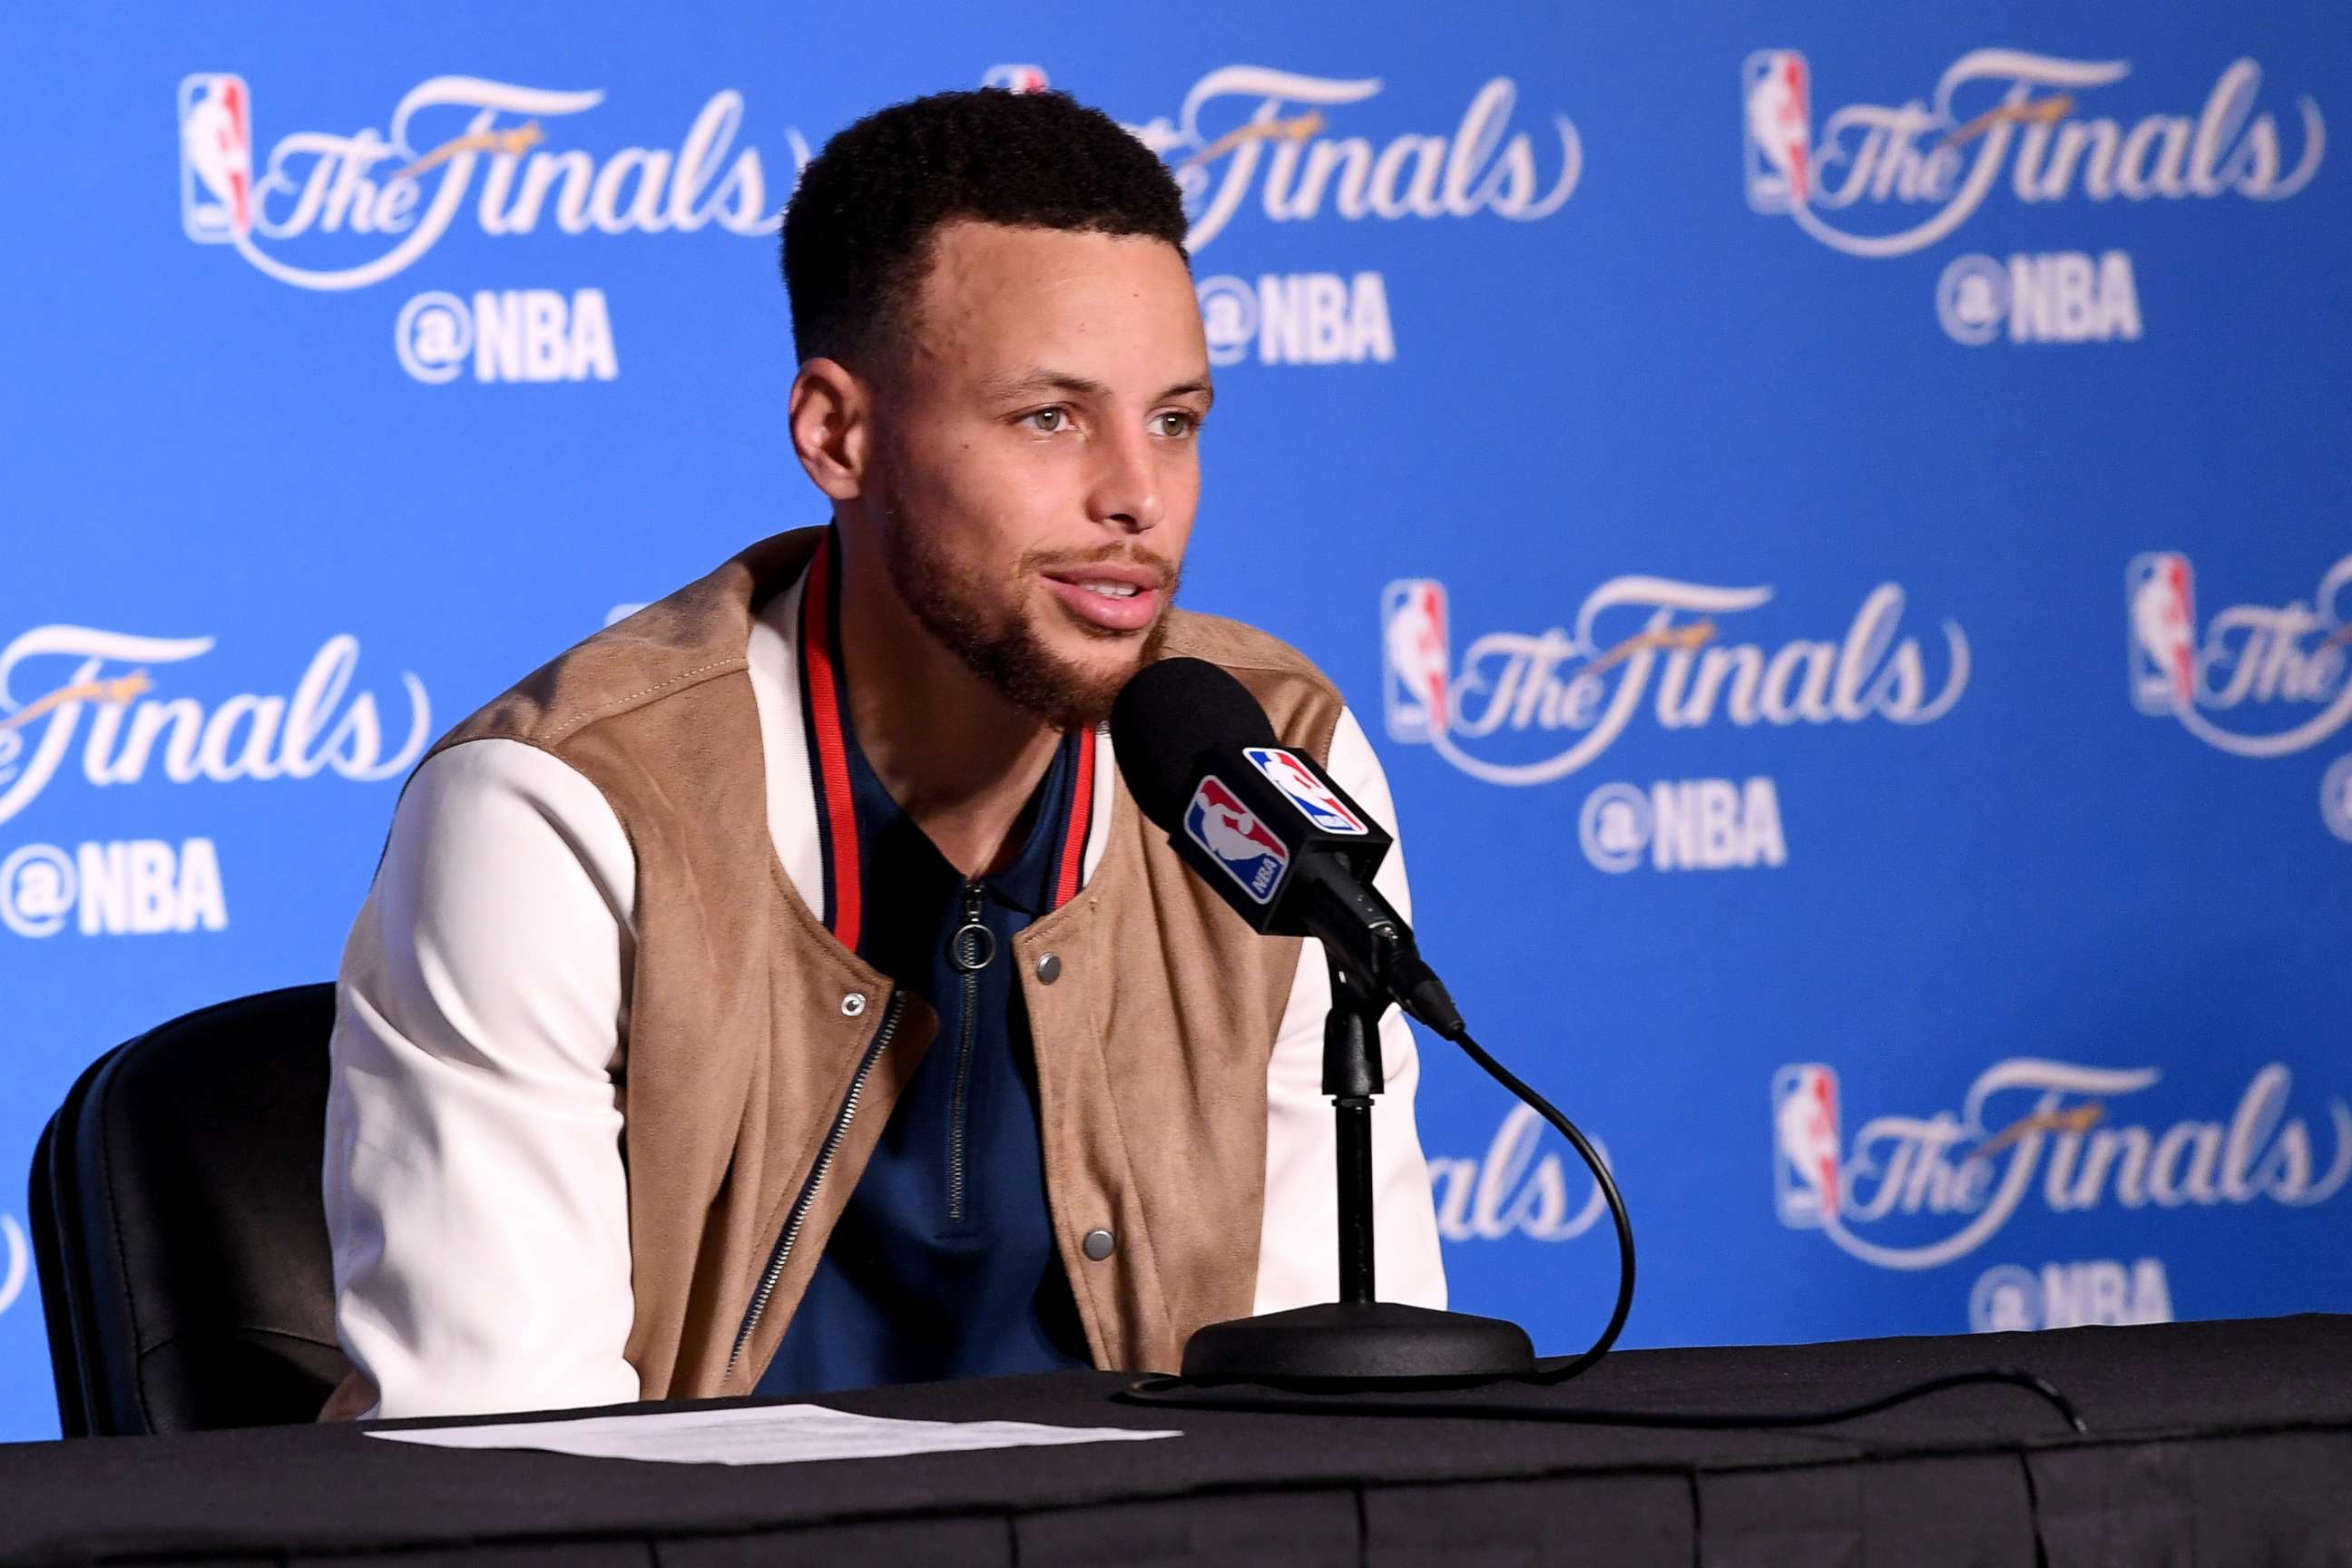 PHOTO: Stephen Curry #30 of the Golden State Warriors speaks at a postgame press conference following their 132-113 win over the Cleveland Cavaliers in Game 2 of the 2017 NBA Finals at ORACLE Arena, June 4, 2017 in Oakland, Calif. 